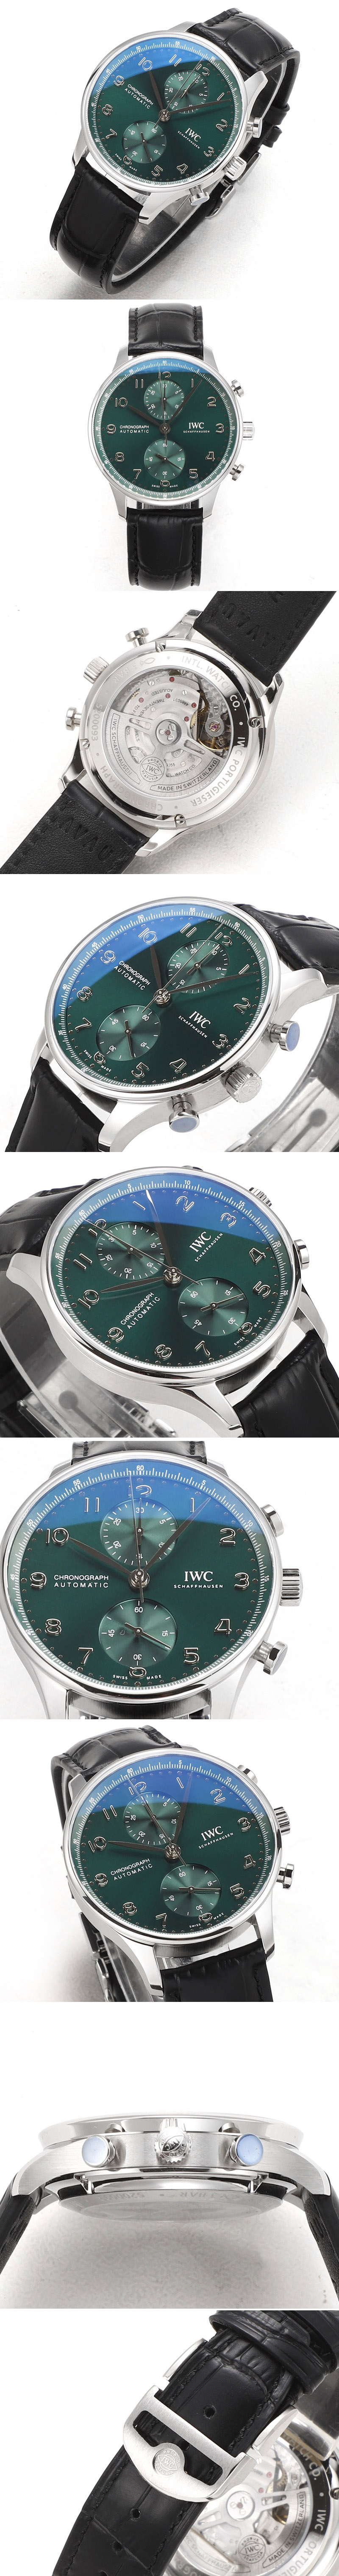 Replica IWC Portuguese Chrono IW3716 RSF 1:1 Best Edition Green Dial on Black Leather Strap A7750